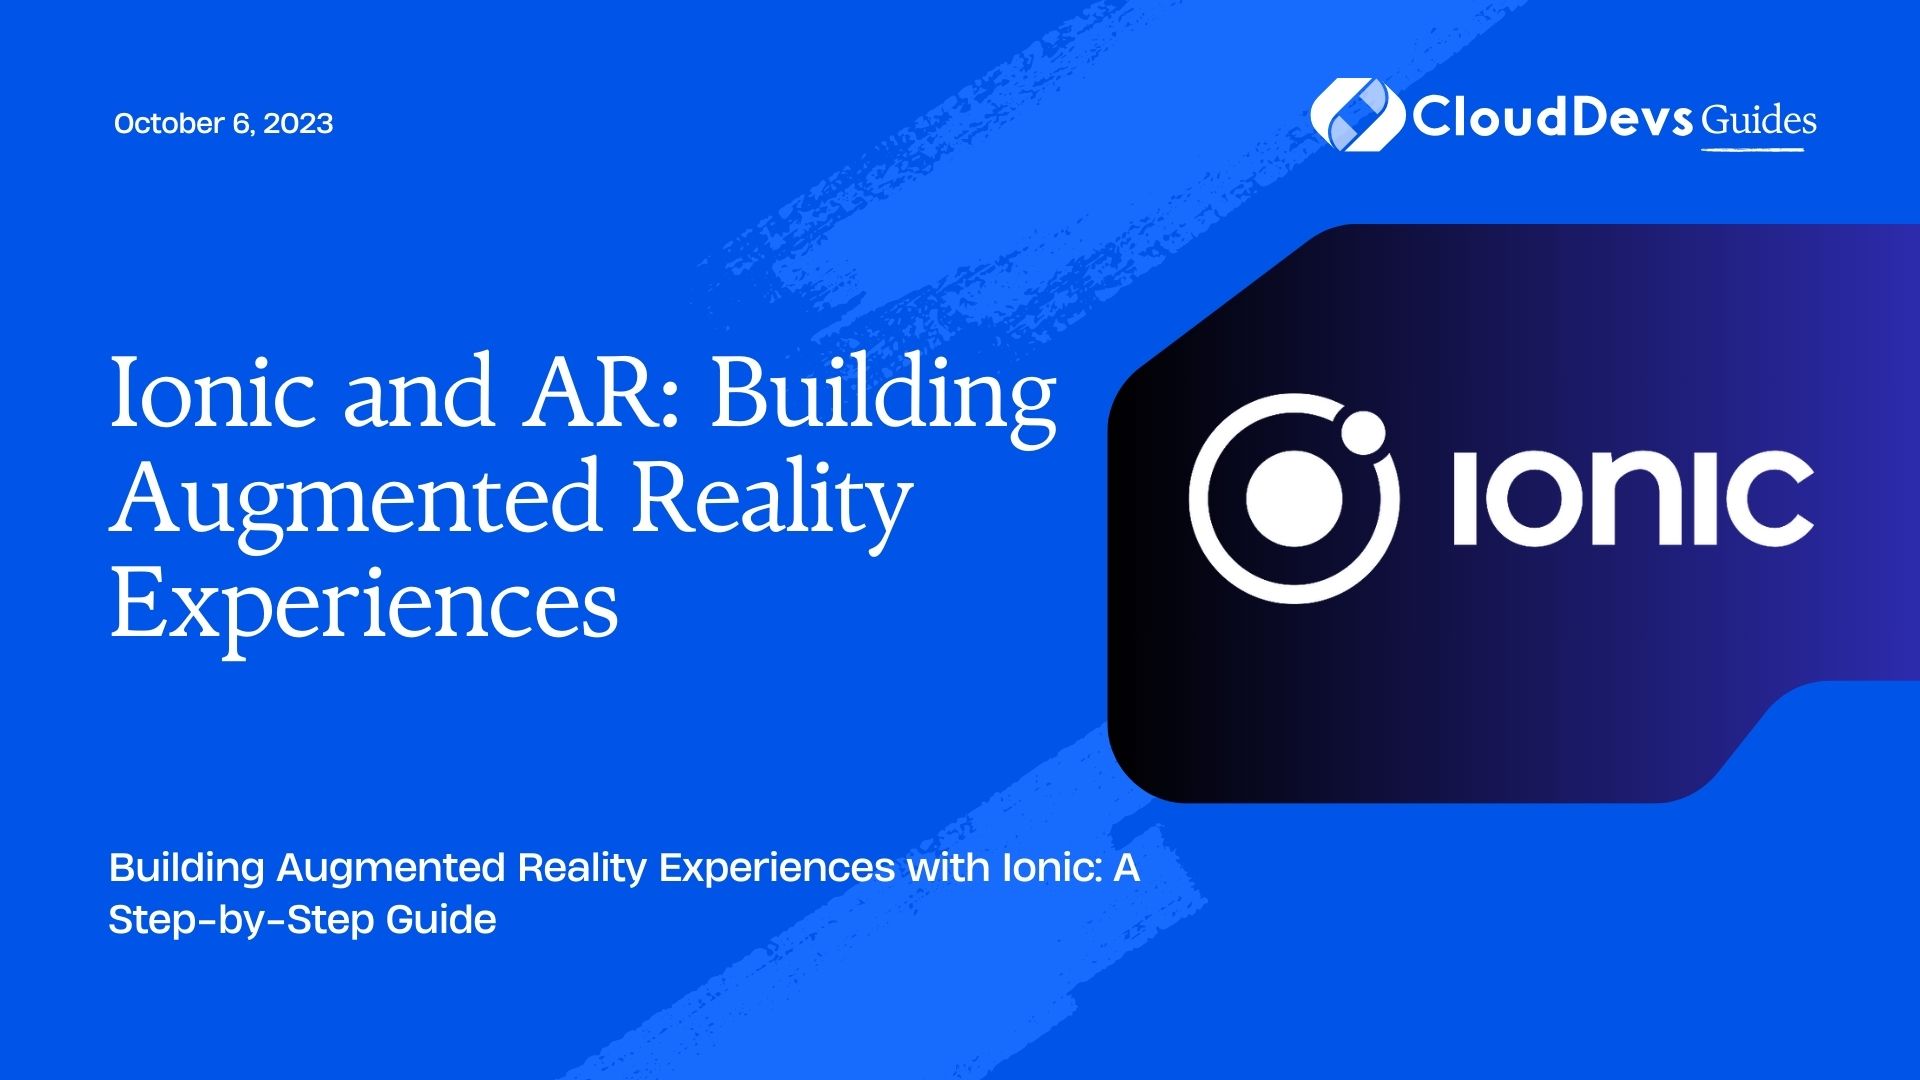 Ionic and AR: Building Augmented Reality Experiences